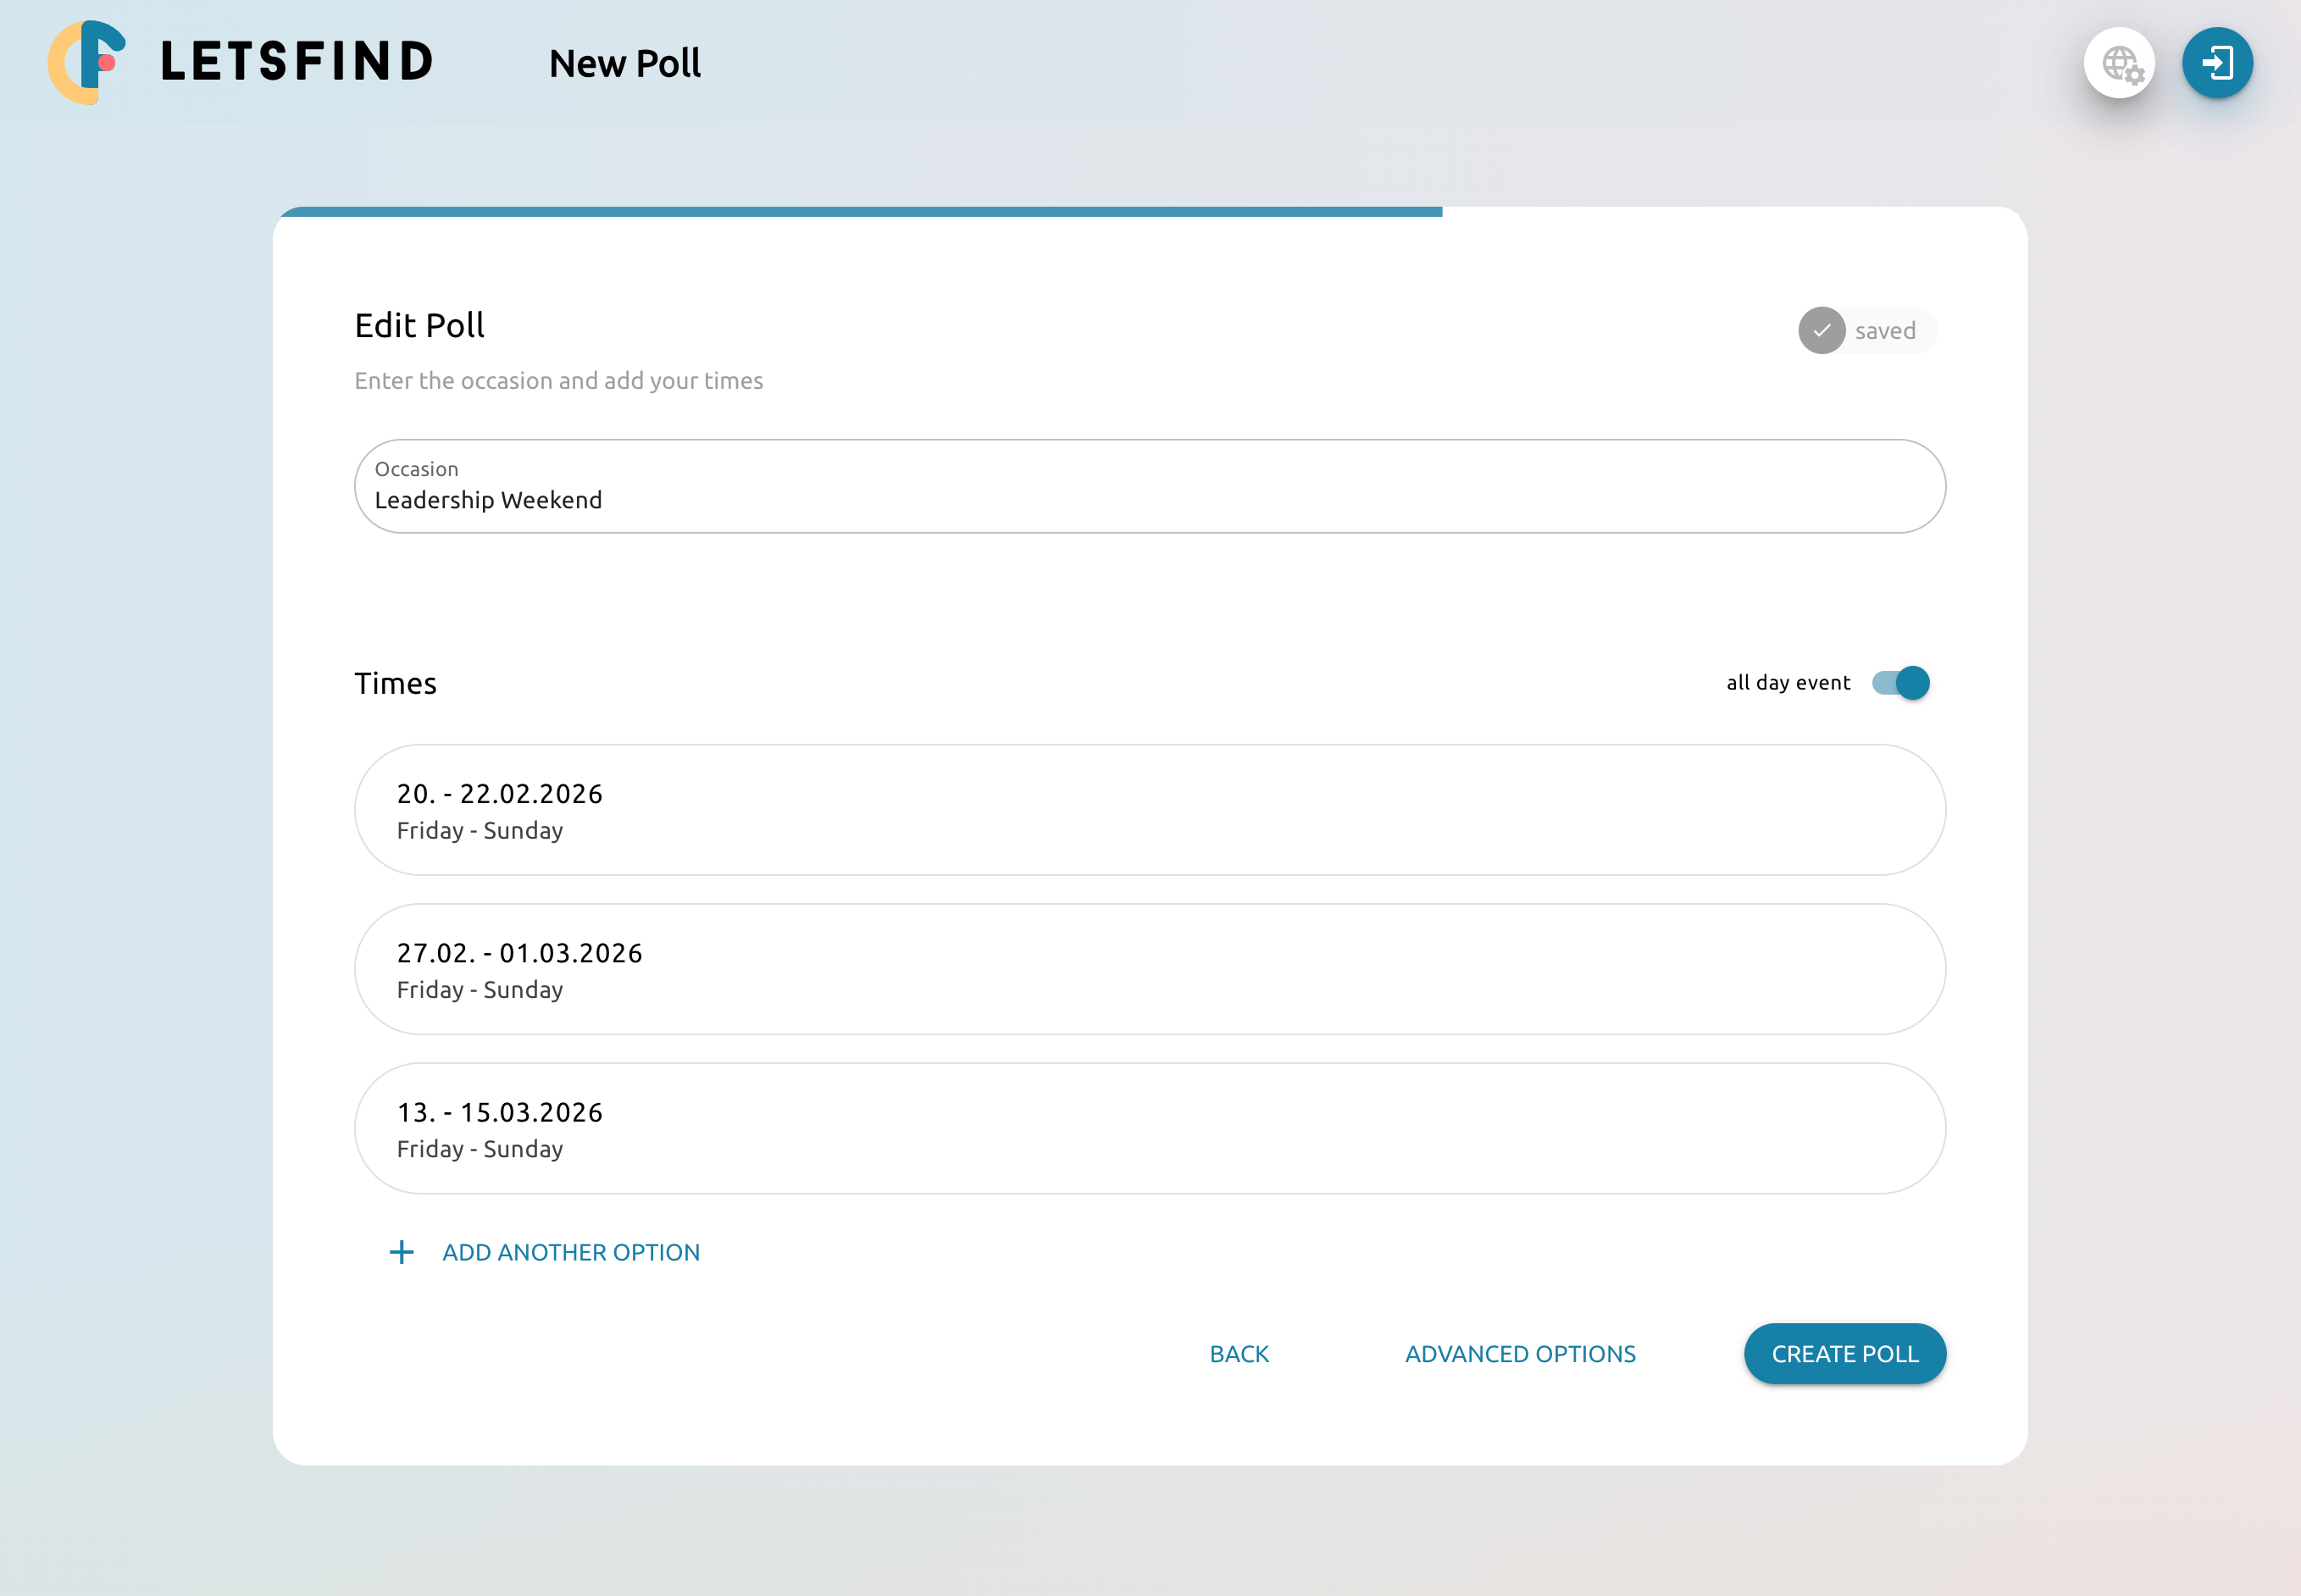 Create a meeting poll. Add some date suggestions and let your team vote.